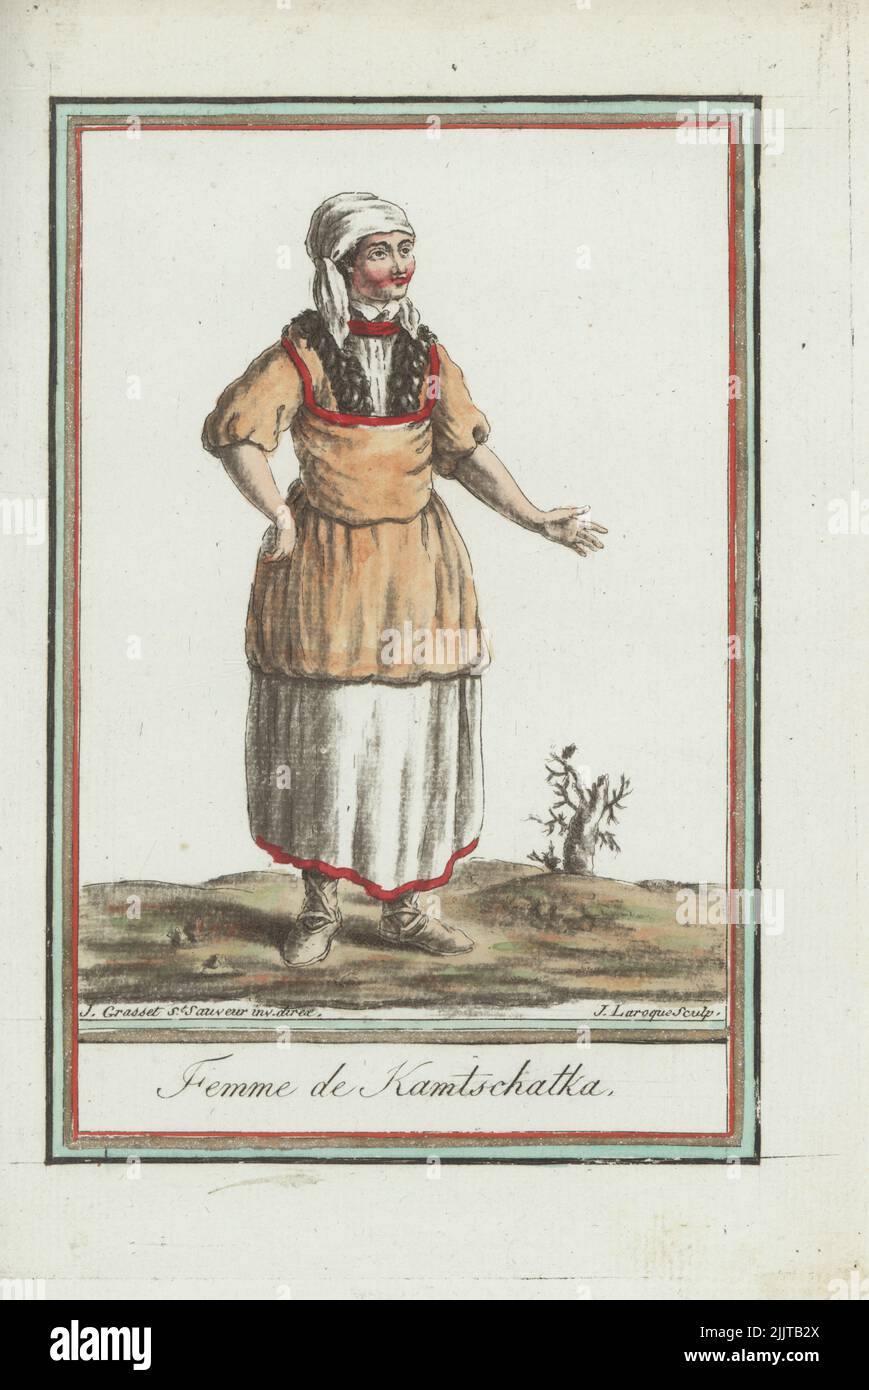 Woman of Kamchatka, Itelmen, Koryak or Ainu. In kerchief headdress, fur-lined gown over skirts, leather shoes. Femme de Kamtschatka. Handcoloured copperplate engraving by J. Laroque after a design by Jacques Grasset de Saint-Sauveur from his Encyclopedie des voyages, Encyclopedia of Voyages, Bordeaux, France, 1792. Stock Photo